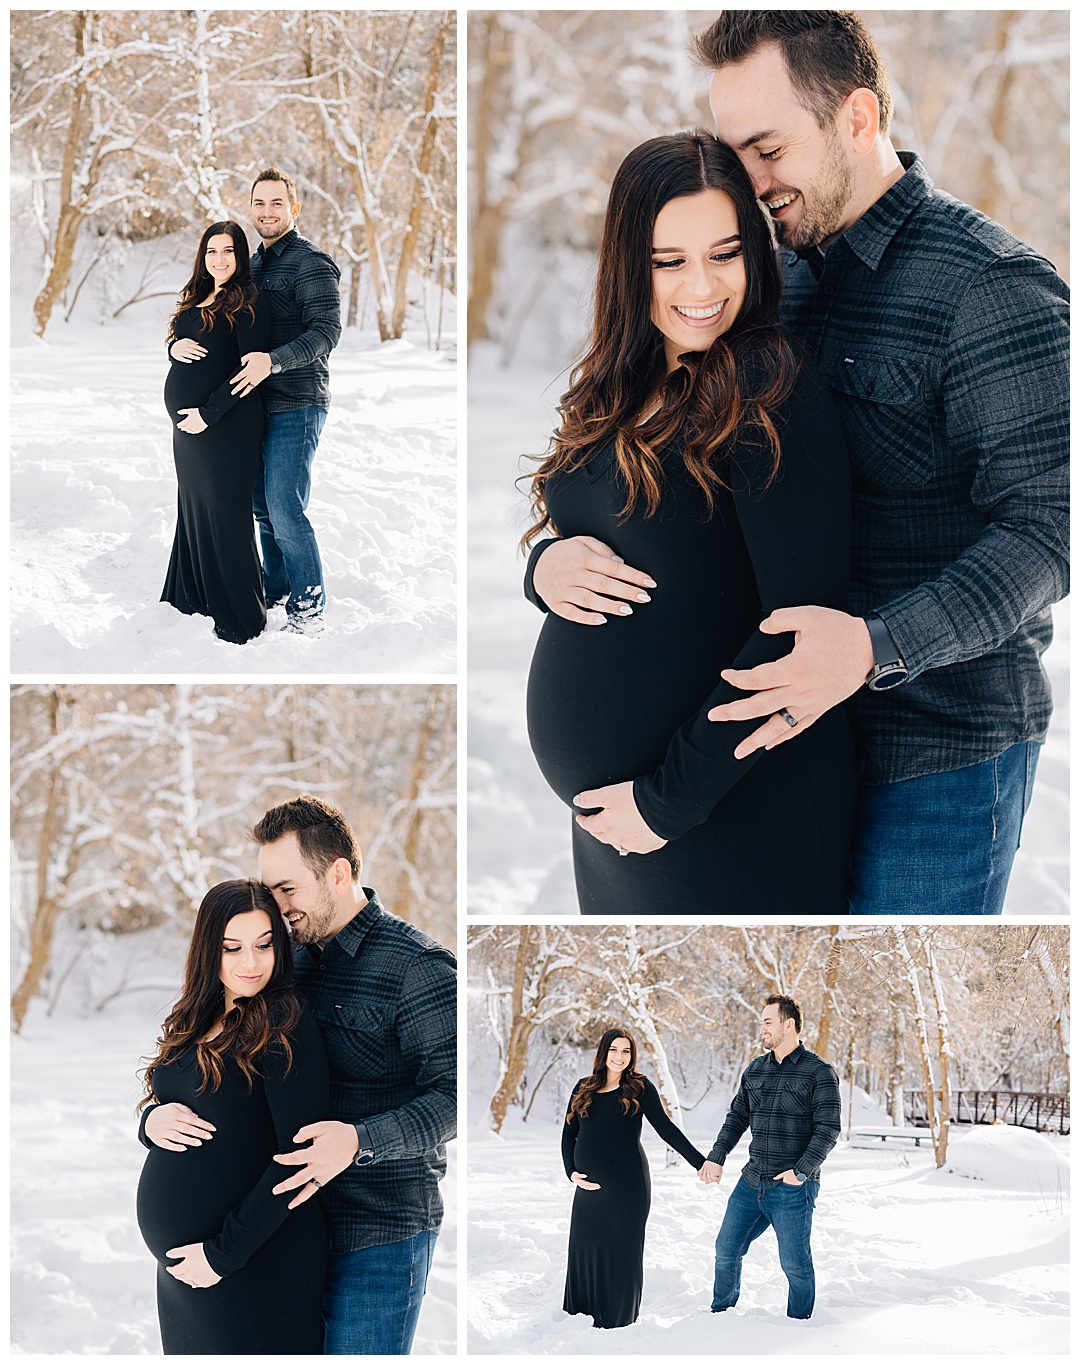 Snowy Maternity Session | Tibble Fork